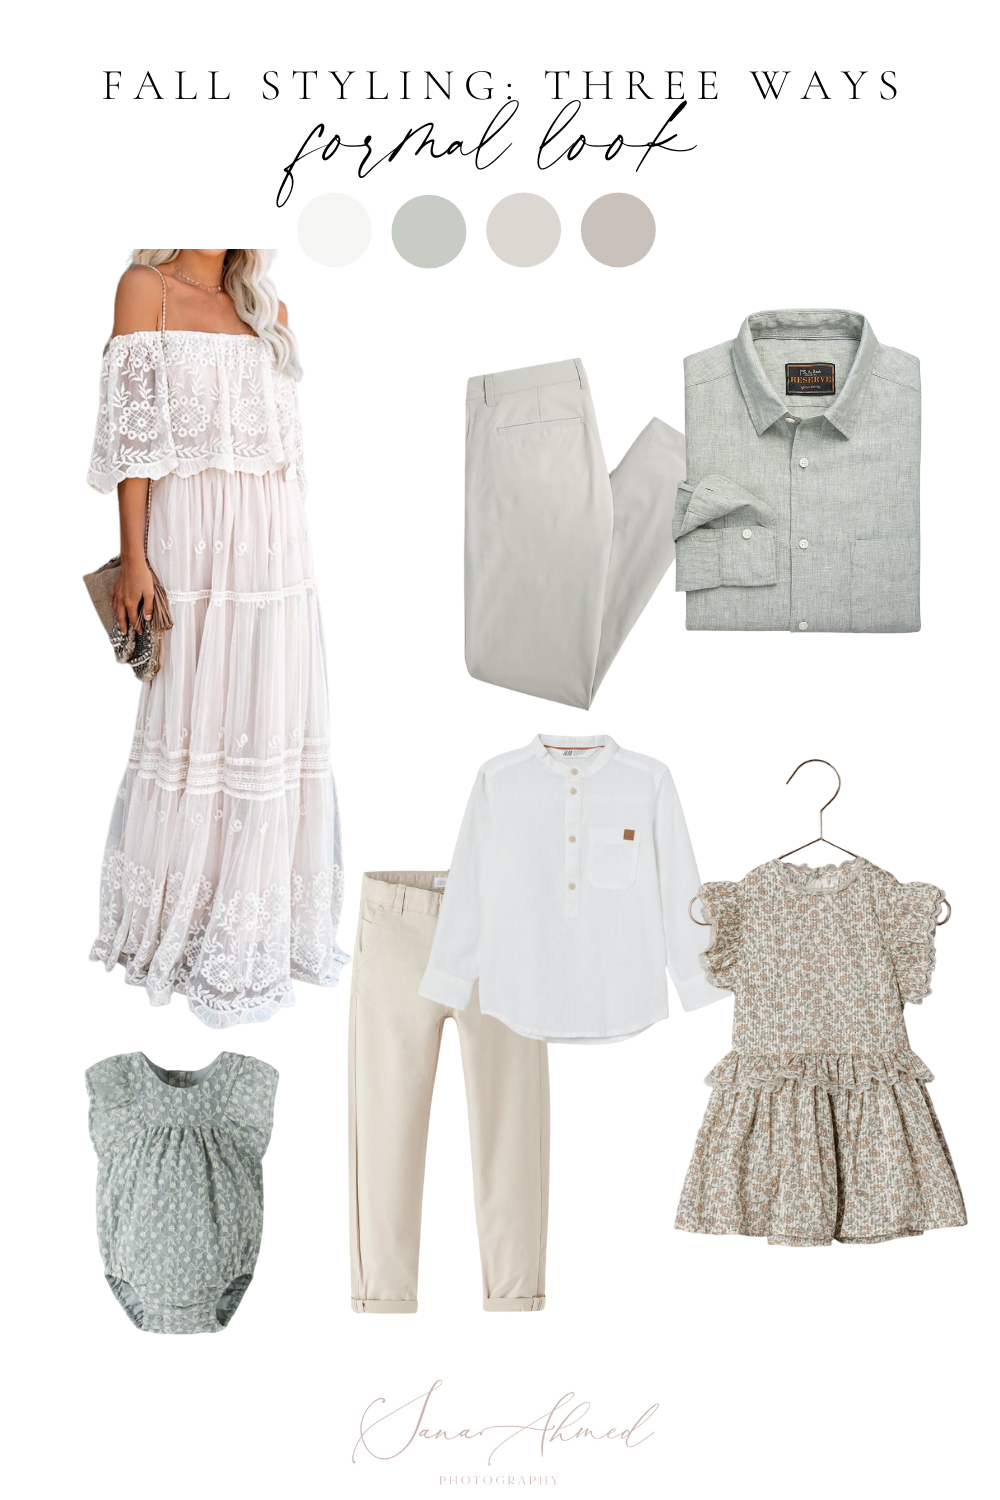 Ideas for outfits to wear during Fall session with sage green and white tones by Sana Ahmed Photography.